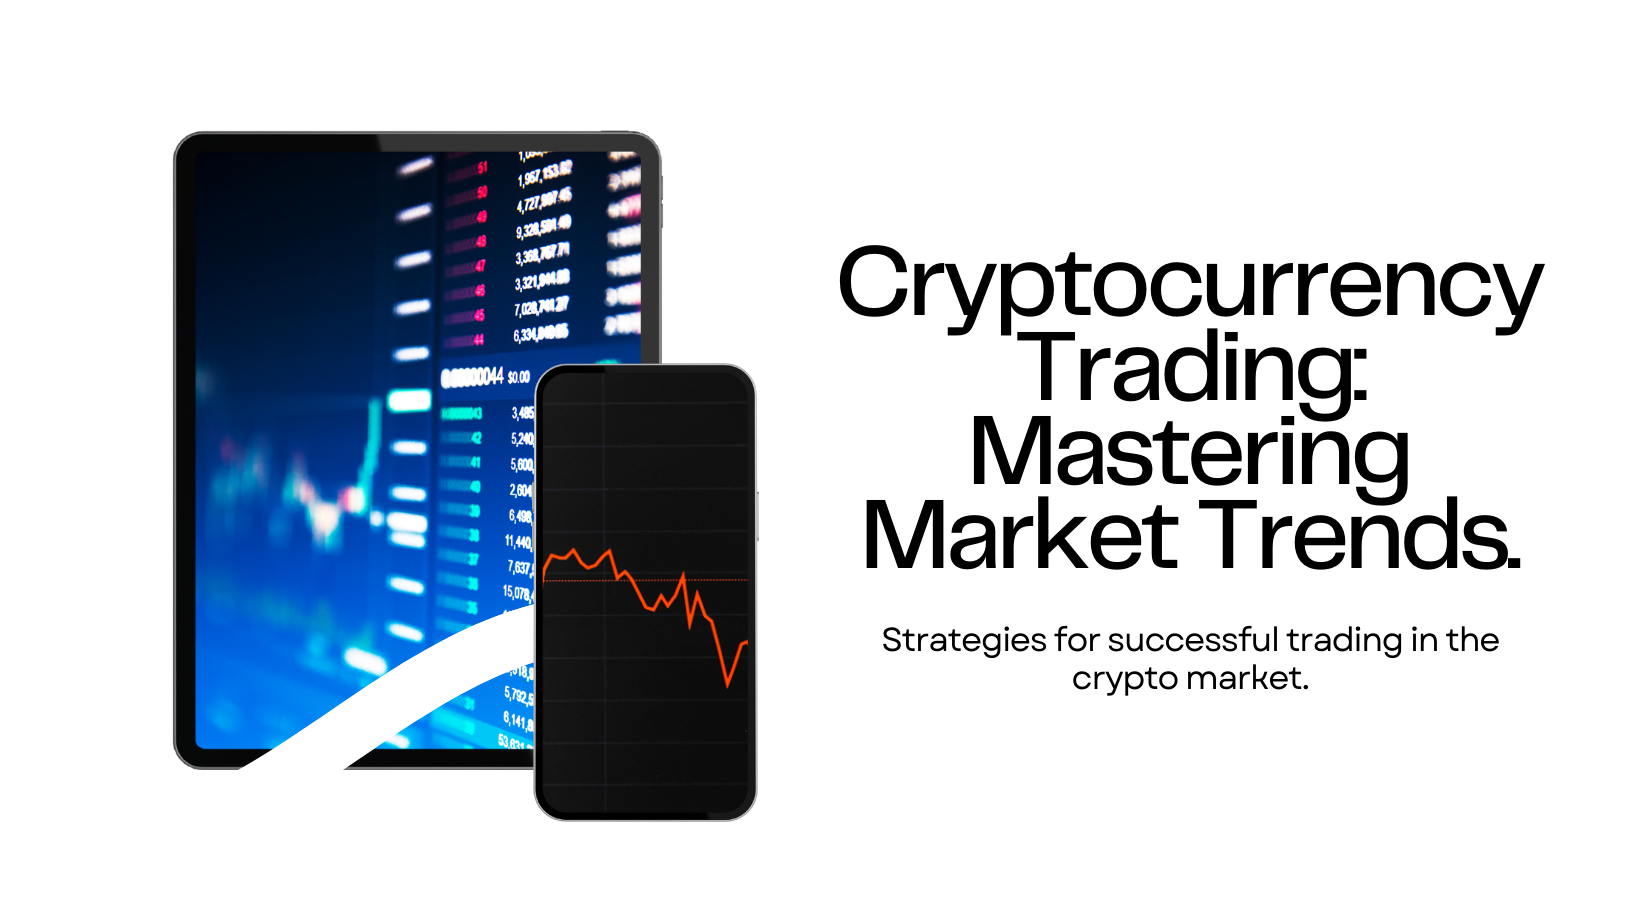 Mastering Market Trends: Tips for Buying Low and Selling High in Cryptocurrency Trading